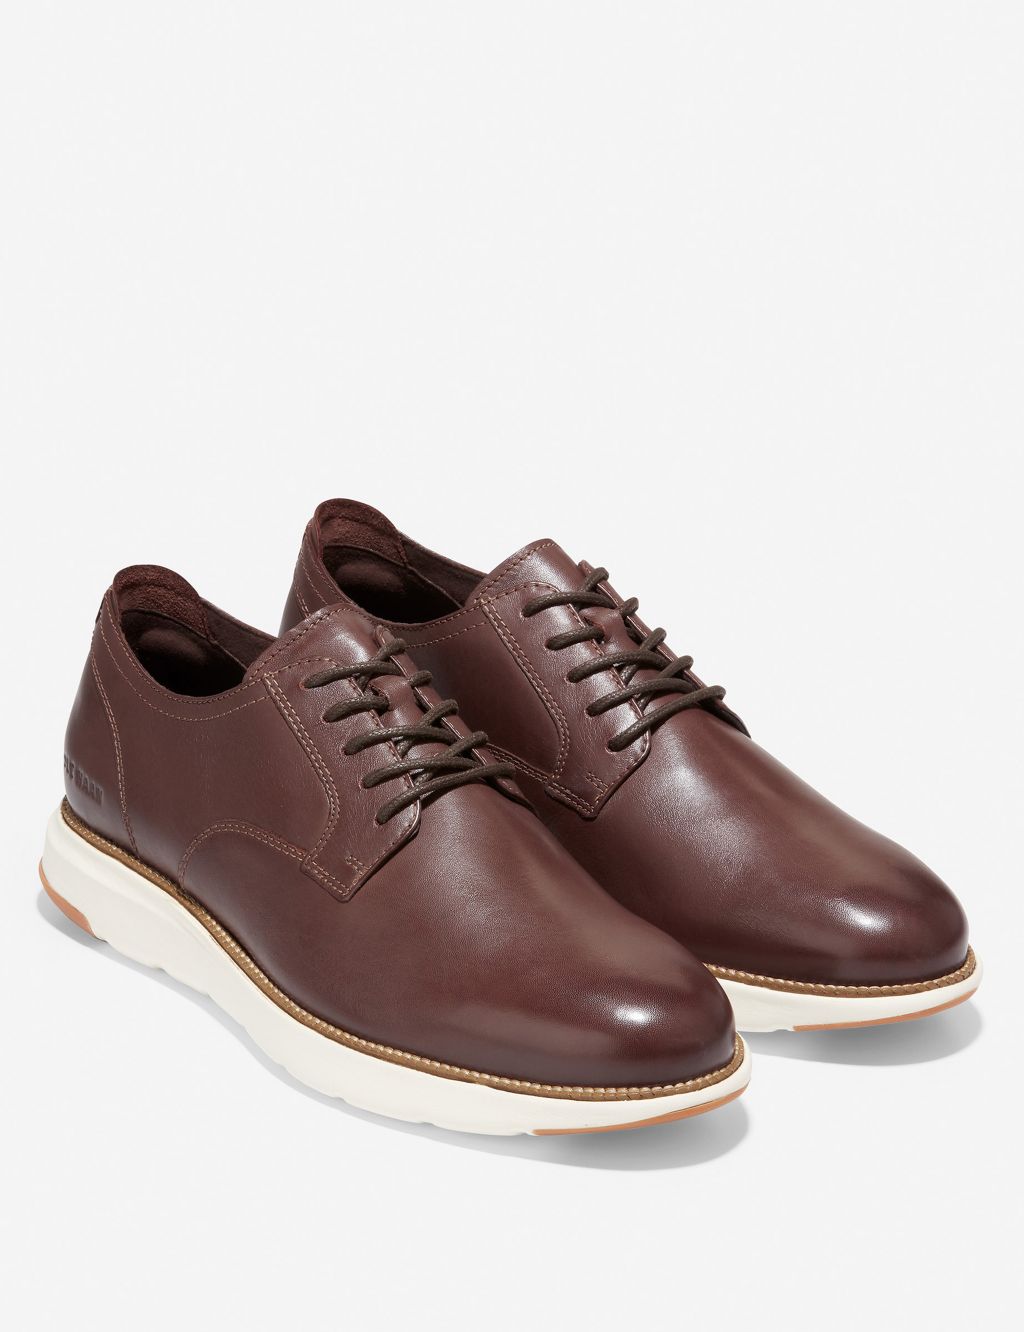 Grand Atlantic Leather Oxford Shoes image 2